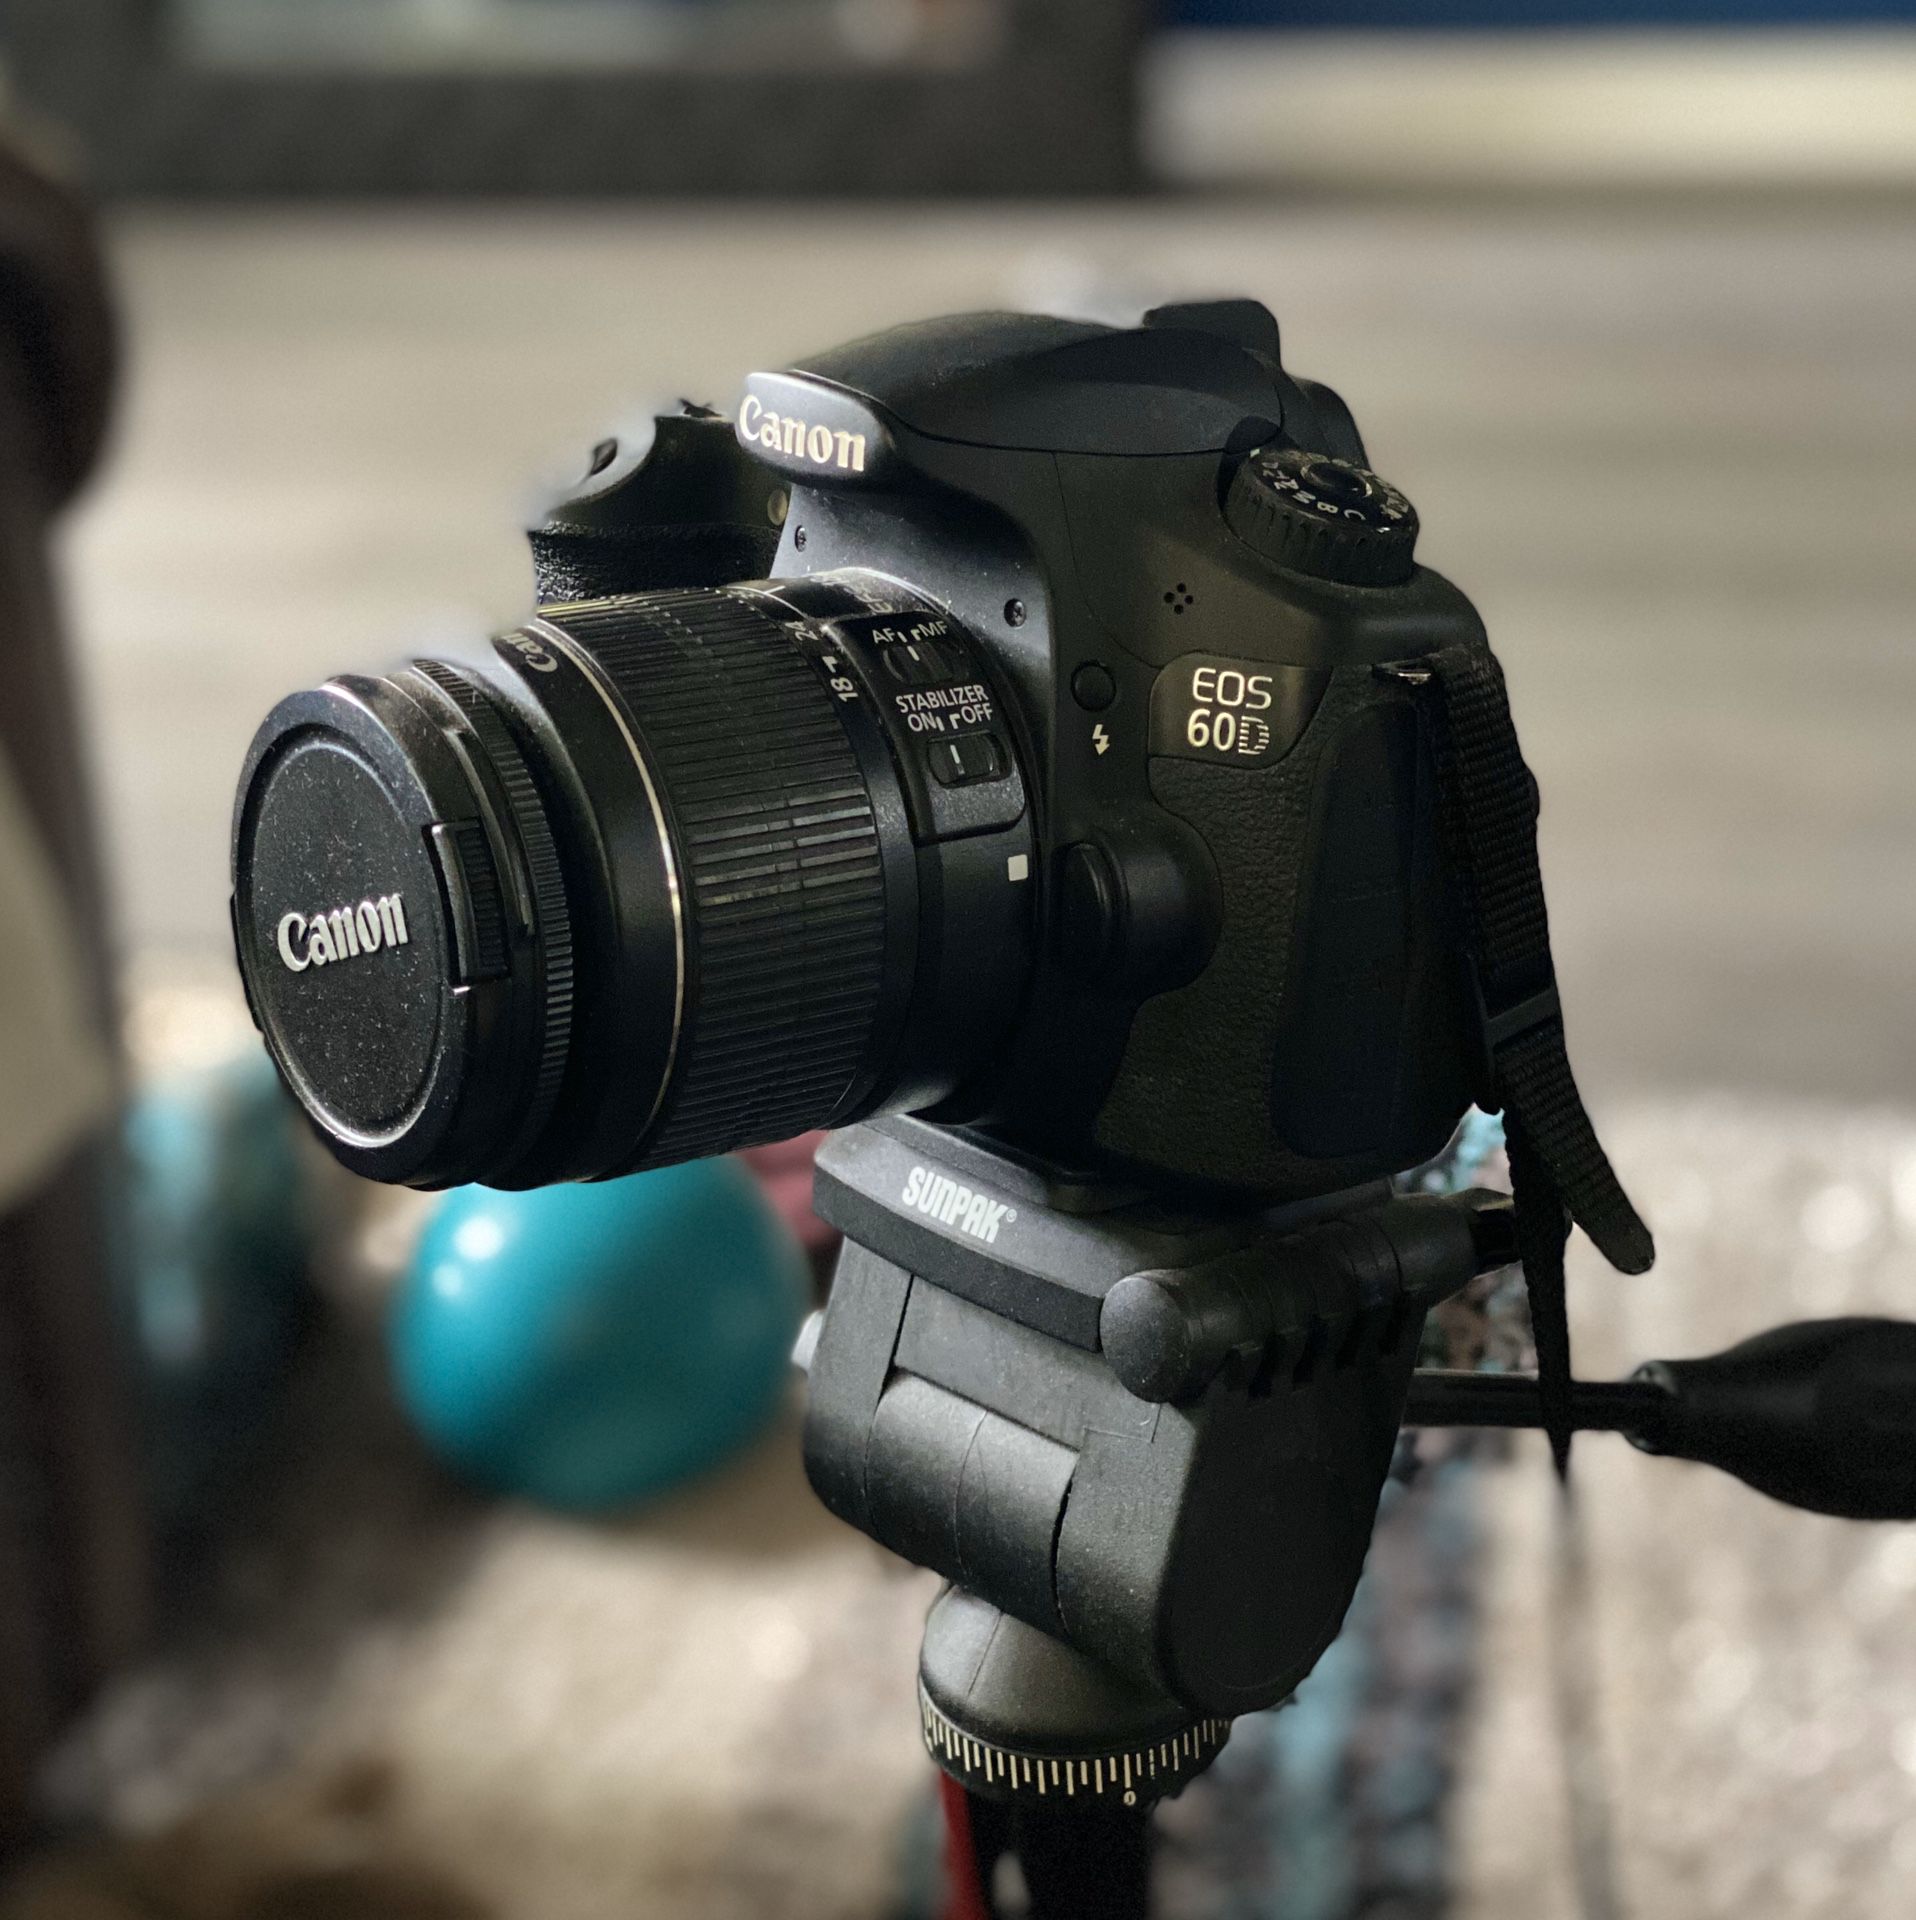 Canon 60D and accessories